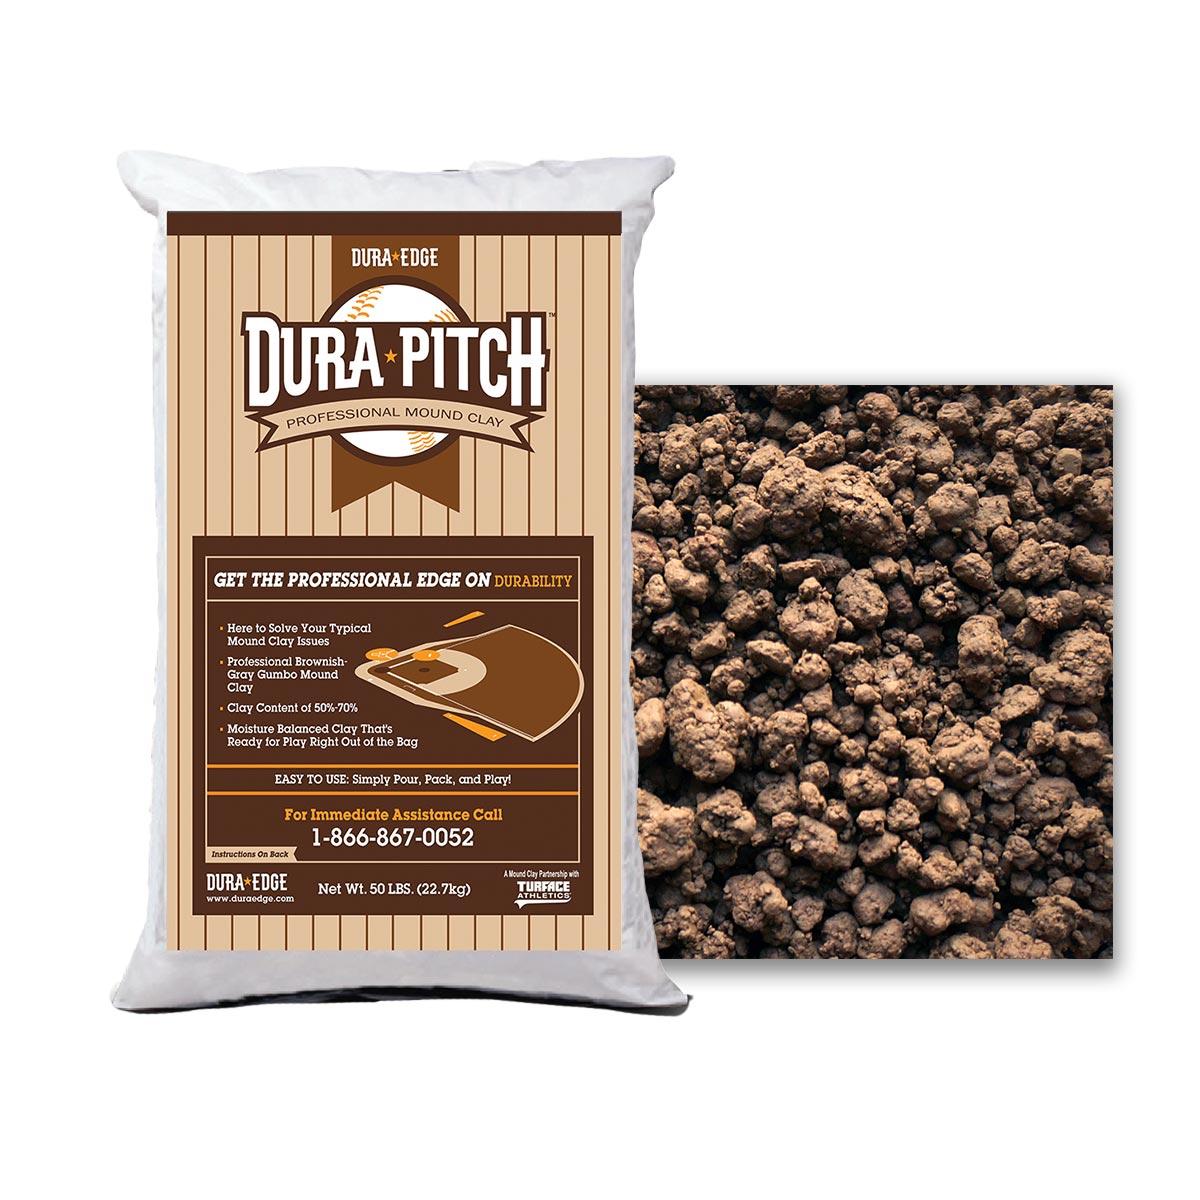 DuraPitch Professional Mound Clay